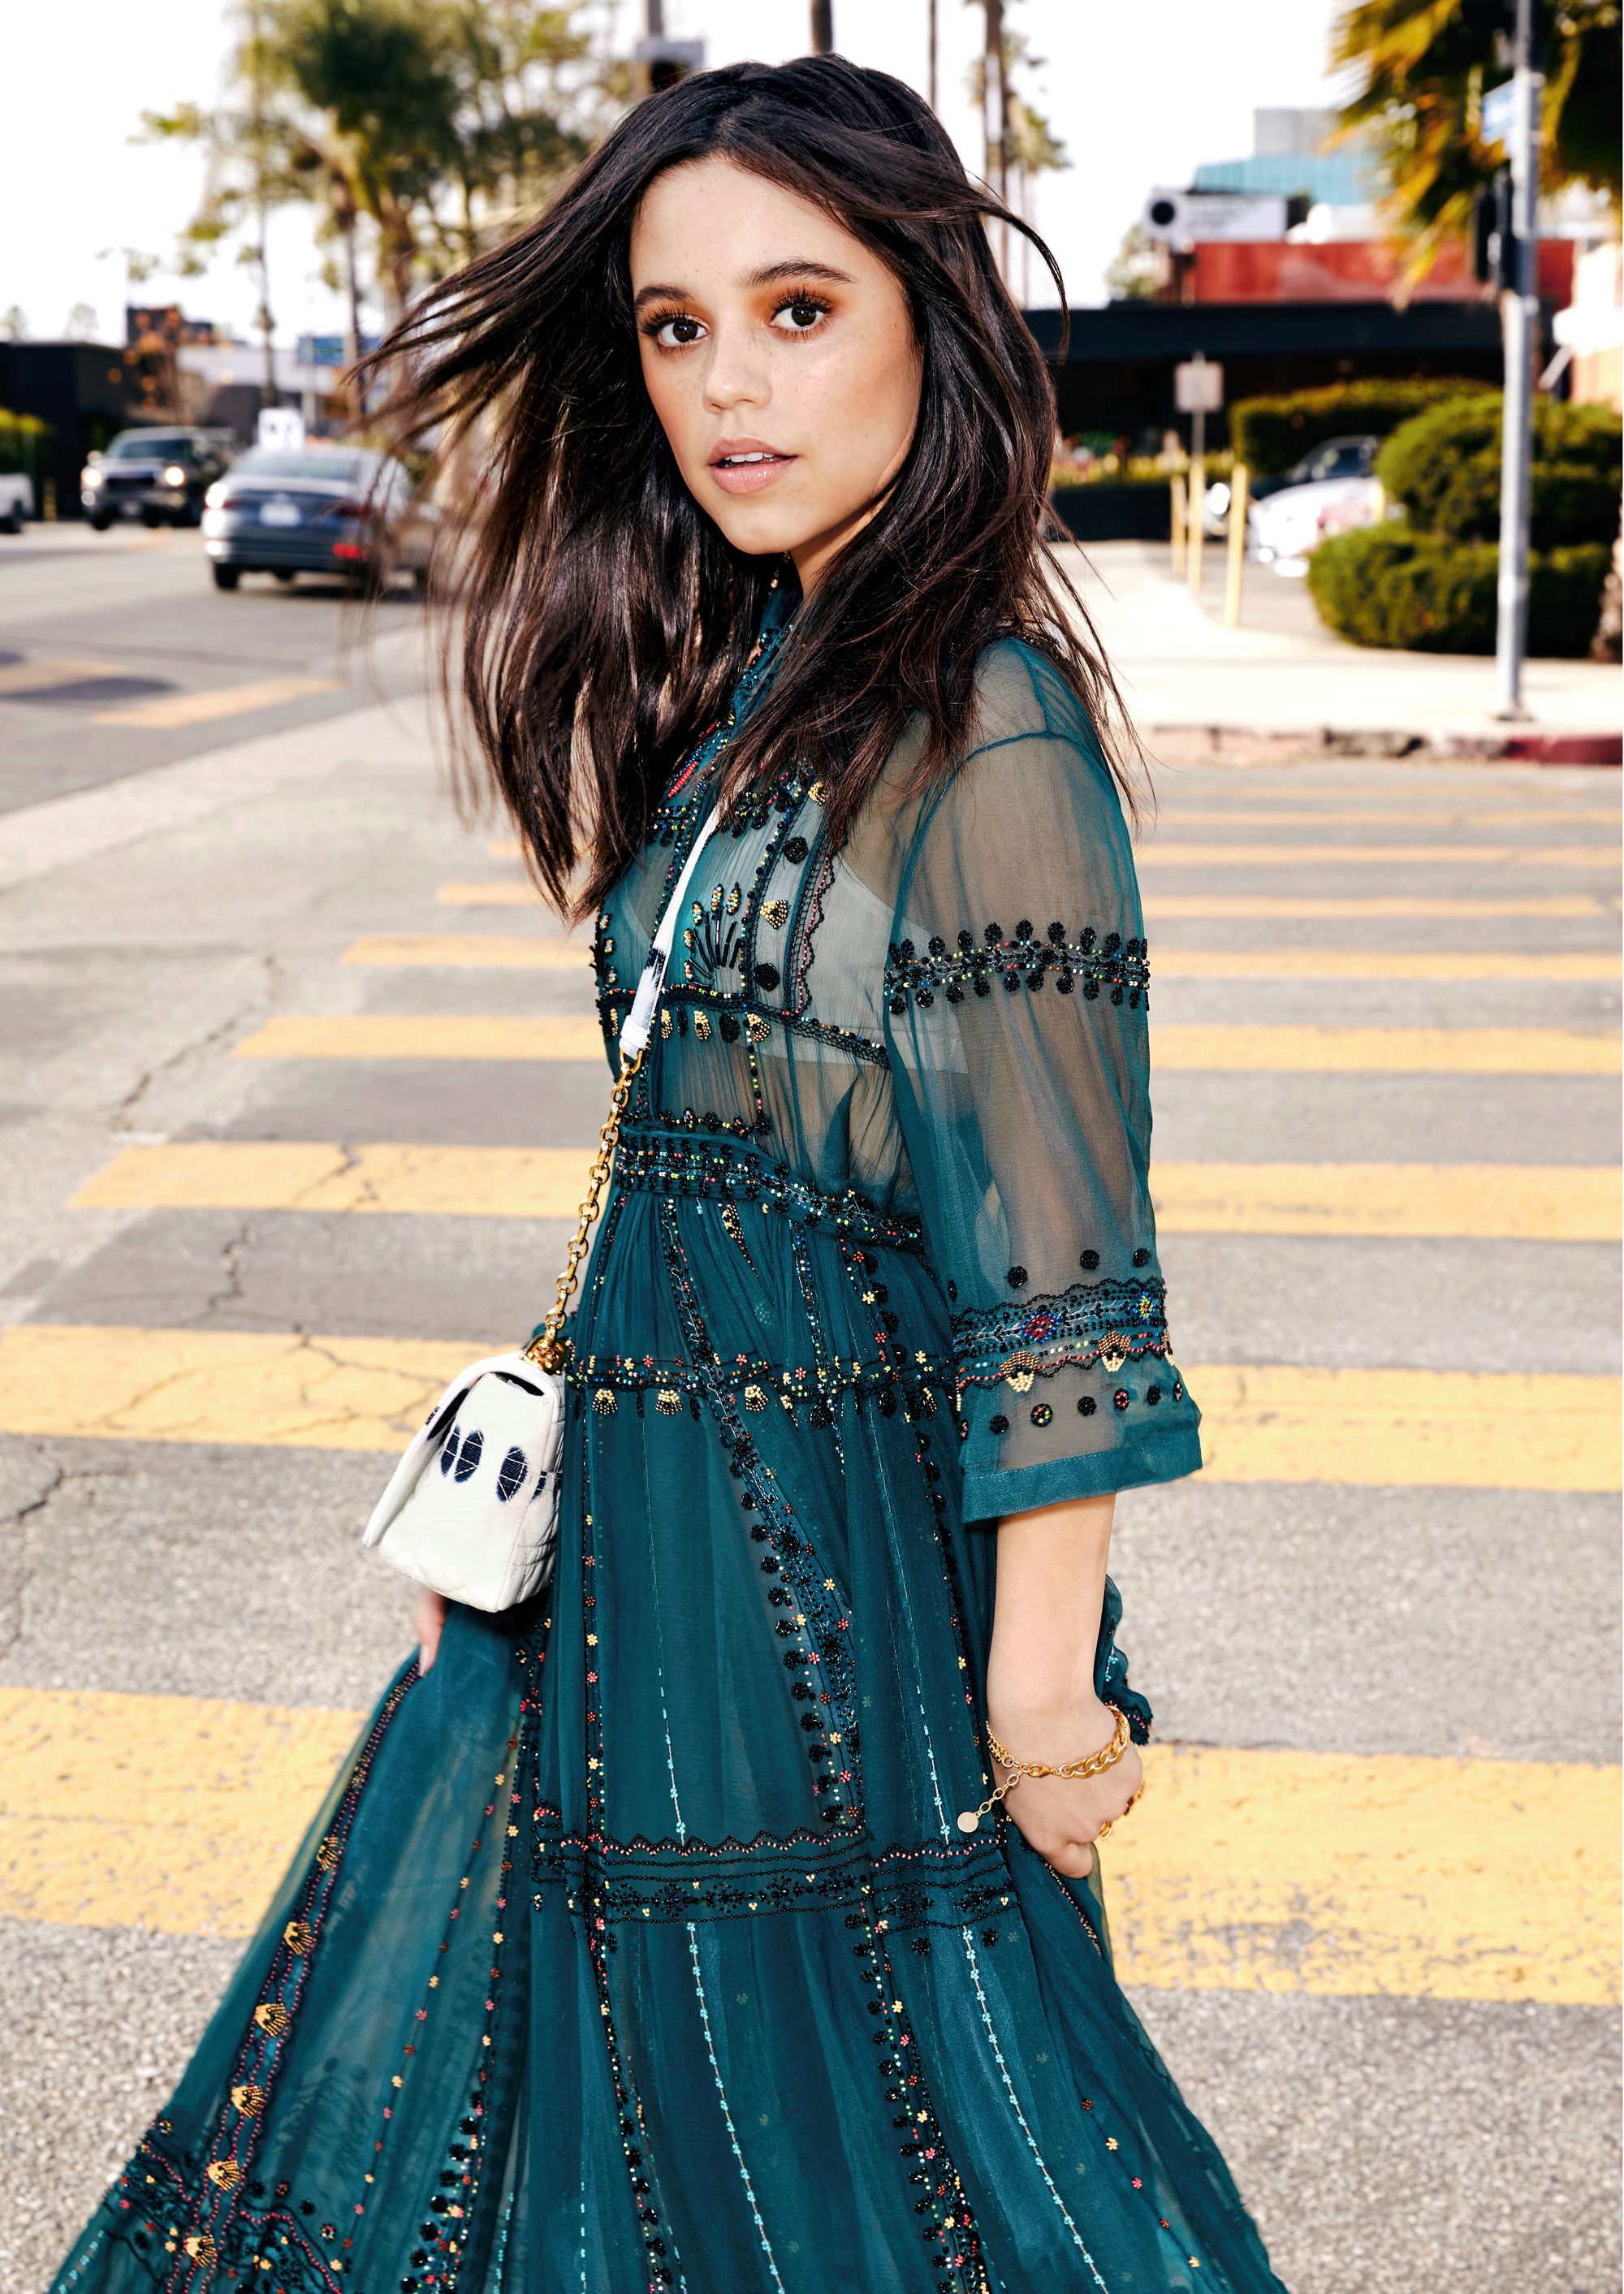 Jenna Ortega 'Yes Day,' 'Scream' Profile and Interview 2021